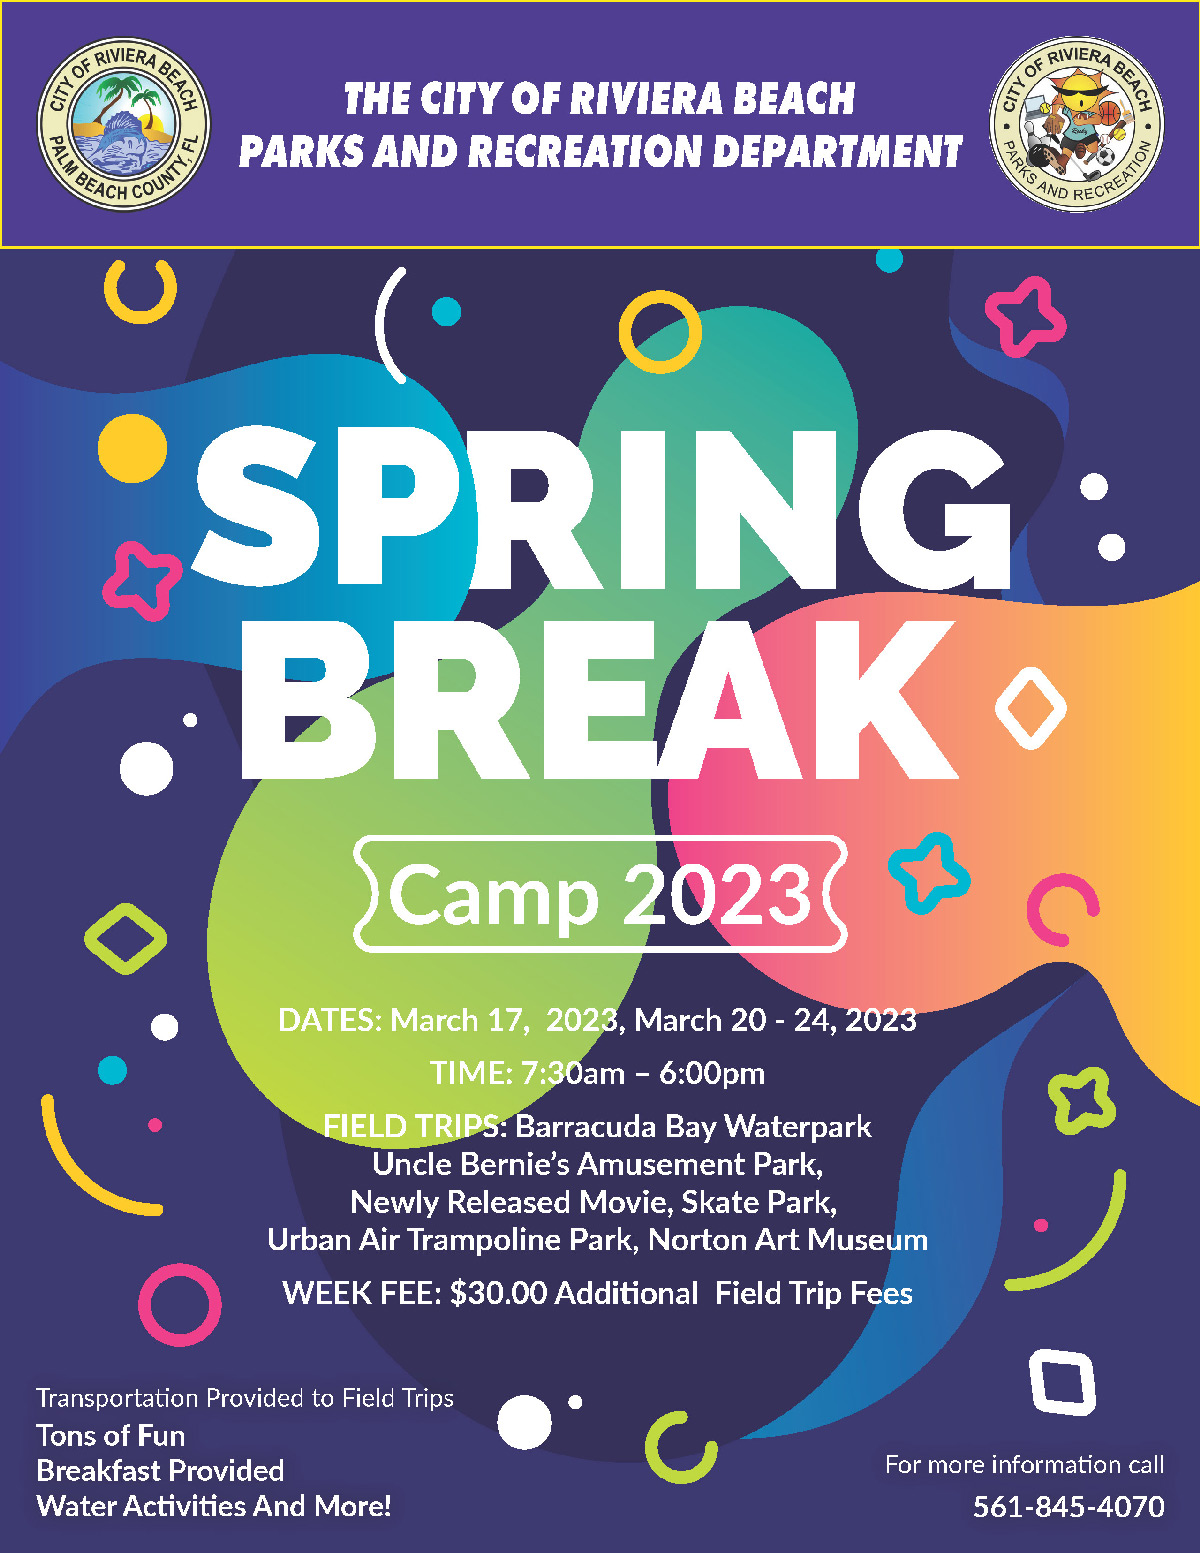 THE CITY OF RIVIERA BEACH PARKS AND RECREATION DEPARTMENT CITY ATERA BENO UNTY SPRING: BREAK SCamp 20230 53 DATES: March 17, 2023, March 20 - 24, 2023 TIME: 7:30am - 6:00pm FIELD TRIPS: Barracuda Bay Waterpark Uncle Bernie's Amusement Park, Newly Released Movie, Skate Park, Urban Air Trampoline Park, Norton Art Museum WEEK FEE: $30.00 Additional Field Trip Fees • Transportation Provided to Field Trips Tons of Fun Breakfast Provided Water Activities And More! ( For more information call 561-845-4070